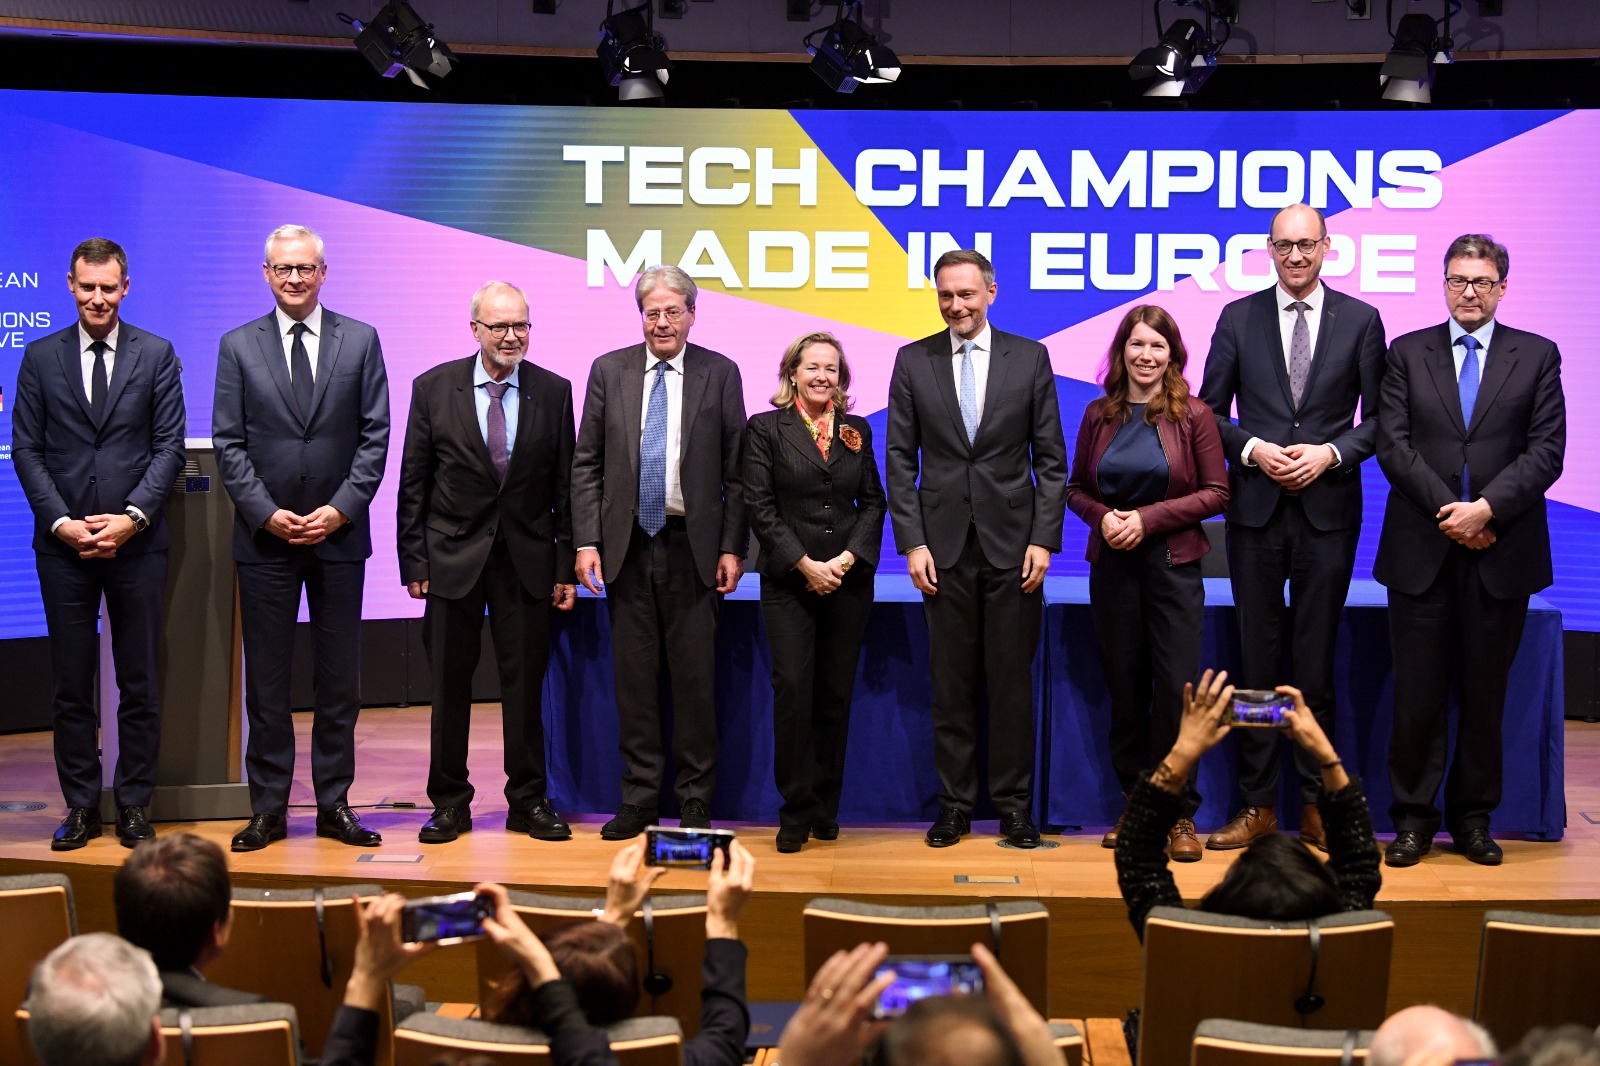 Launch of new Fund of Funds to Support European Tech Champions